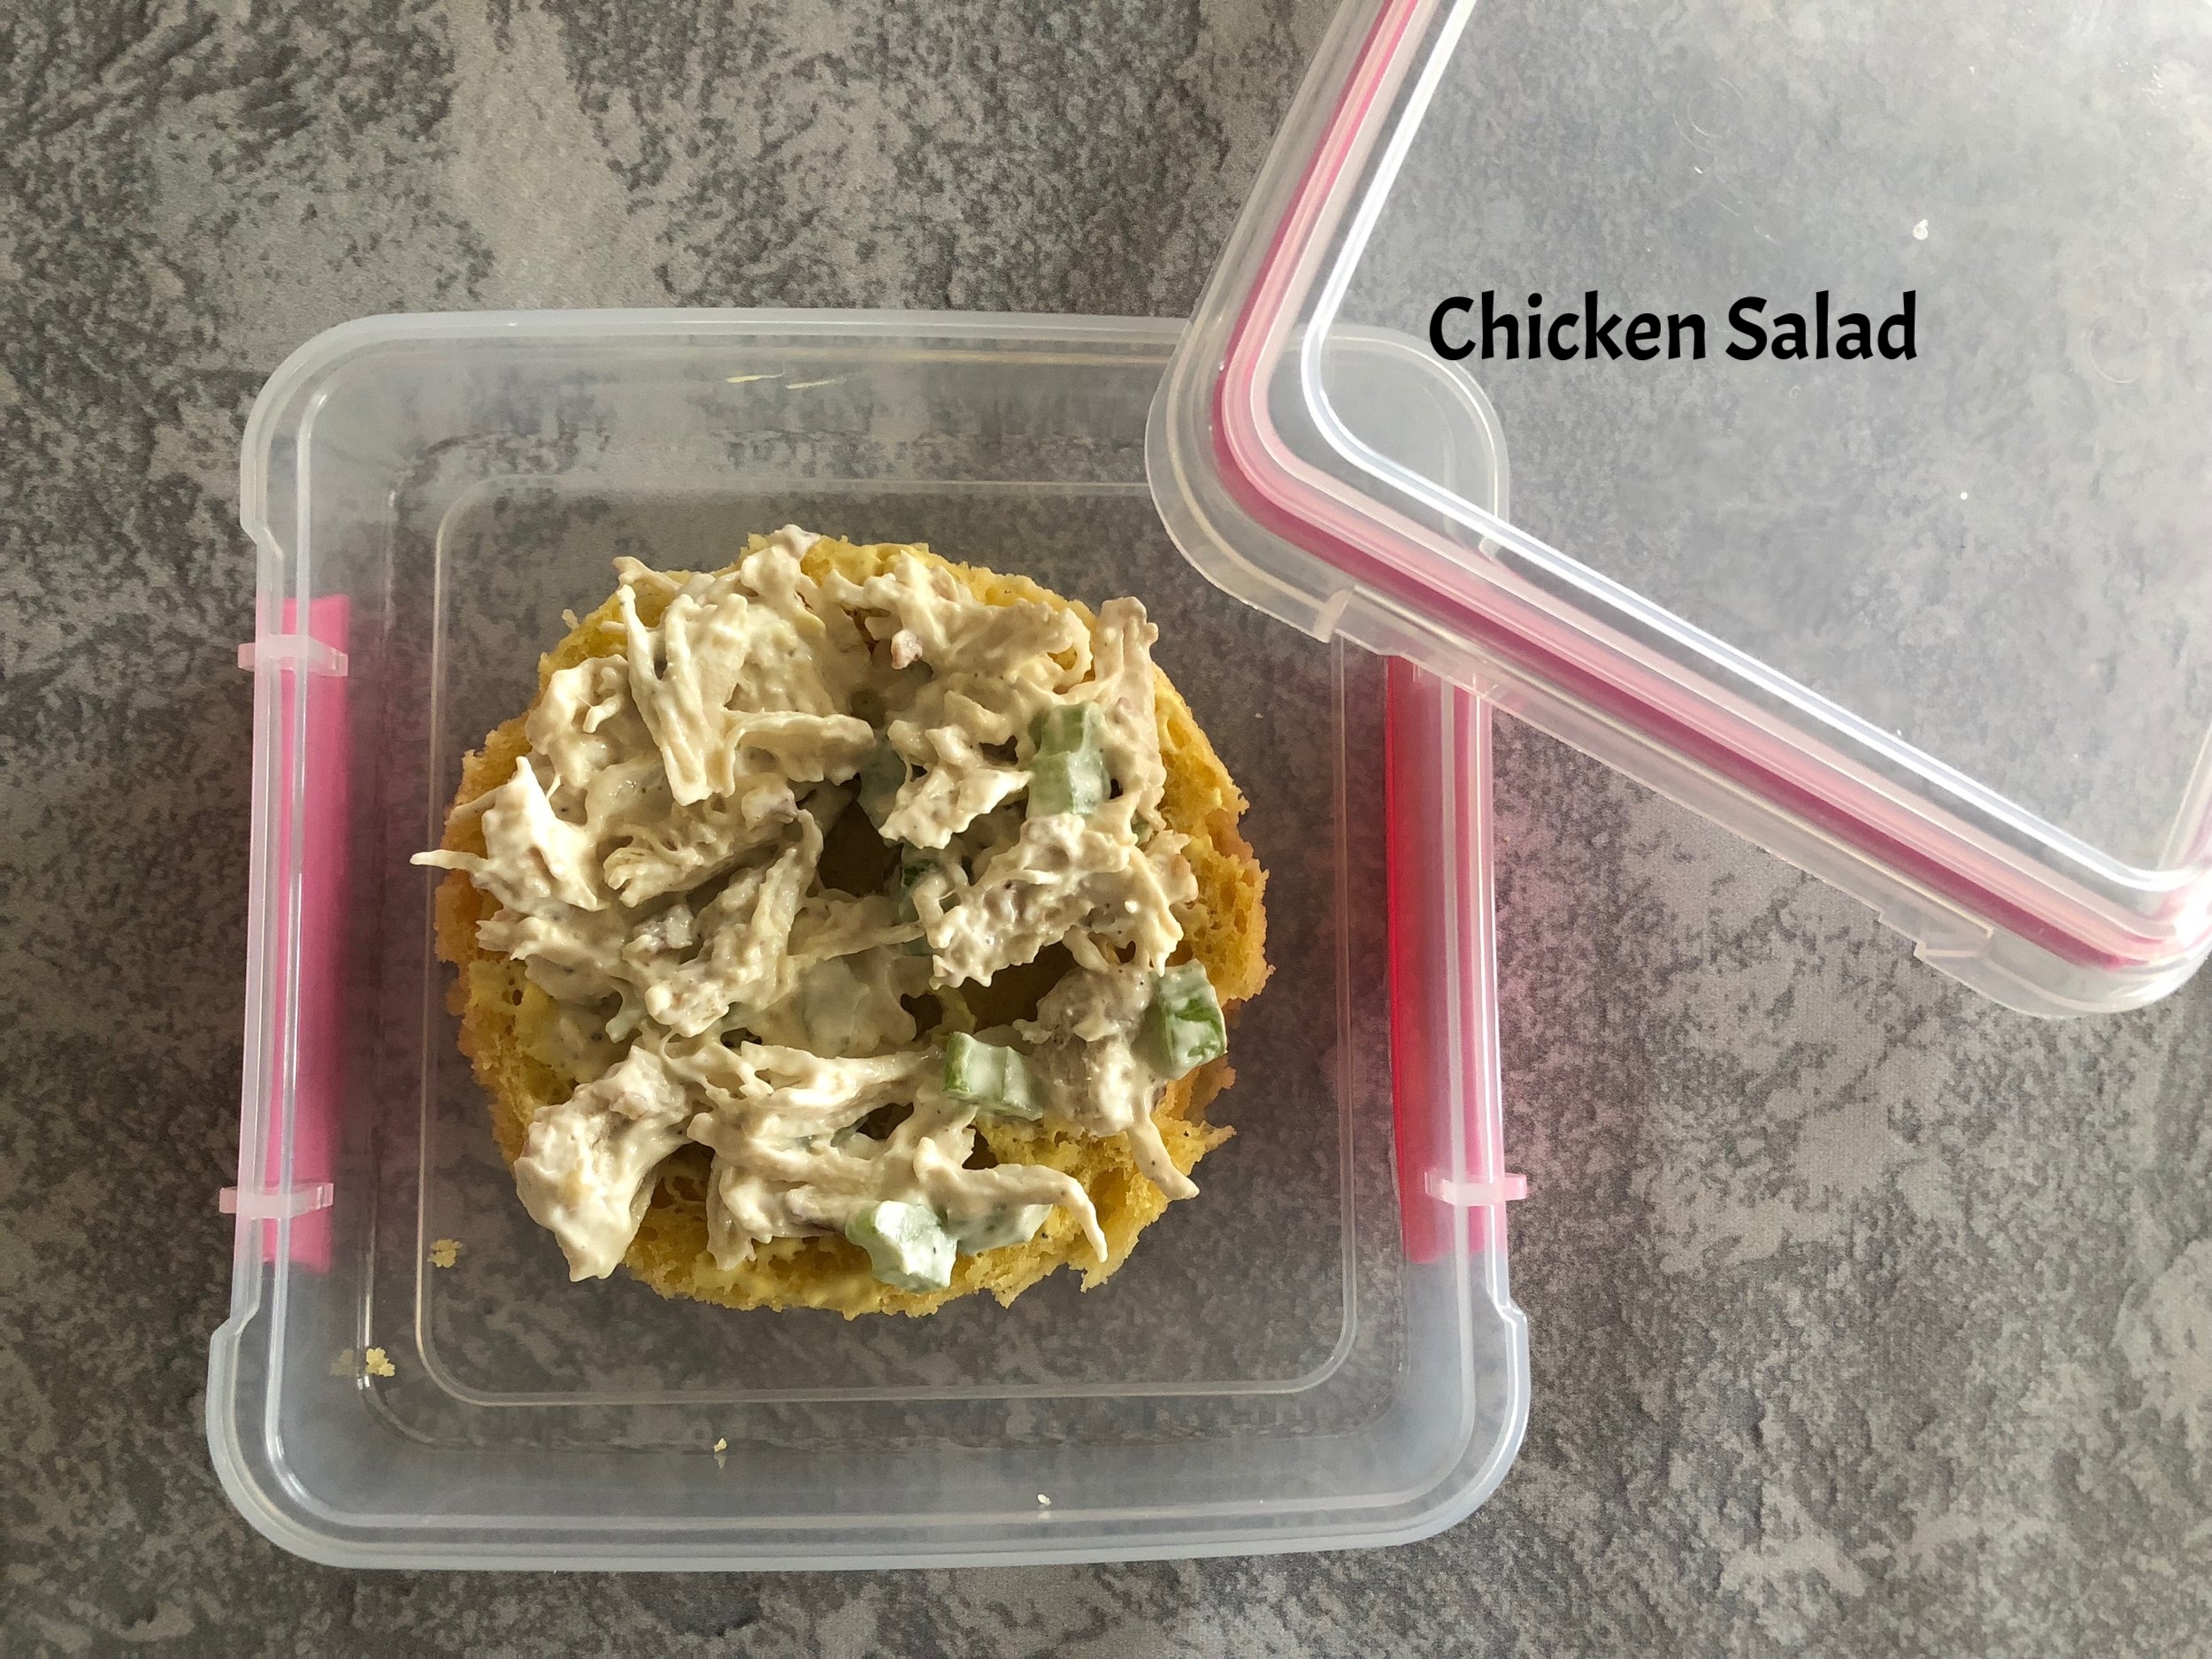 Lunch Chicken Salad 90s Bread 2 Keto and Low Carb.jpg